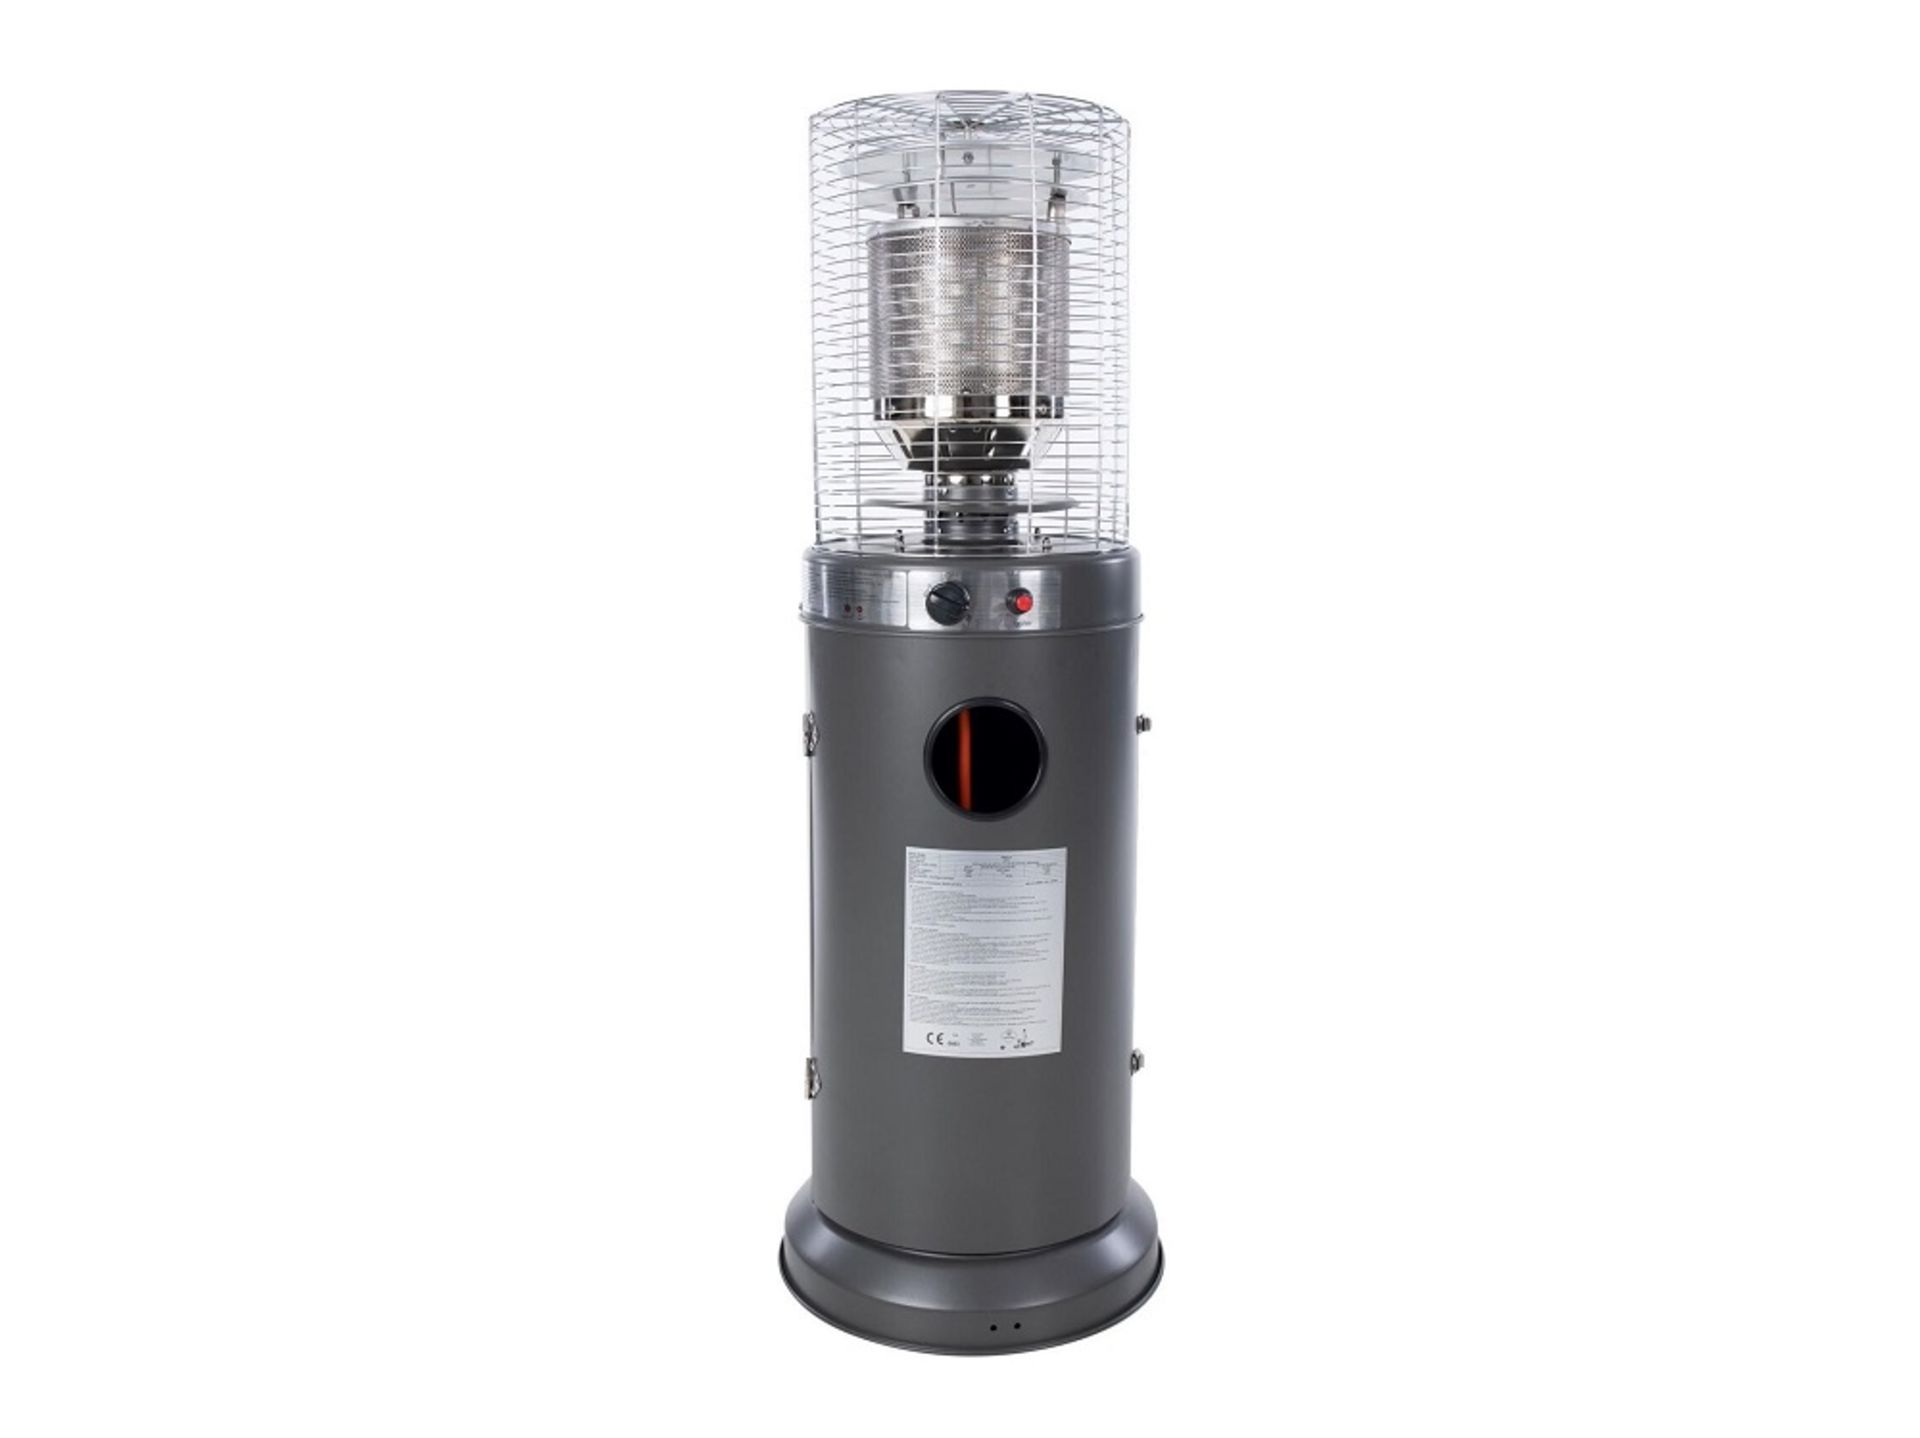 Brand New Boxed RRP £259 - Sunred Propus LH15G Luxury Outdoor Garden Gas Patio Heater - Image 4 of 6